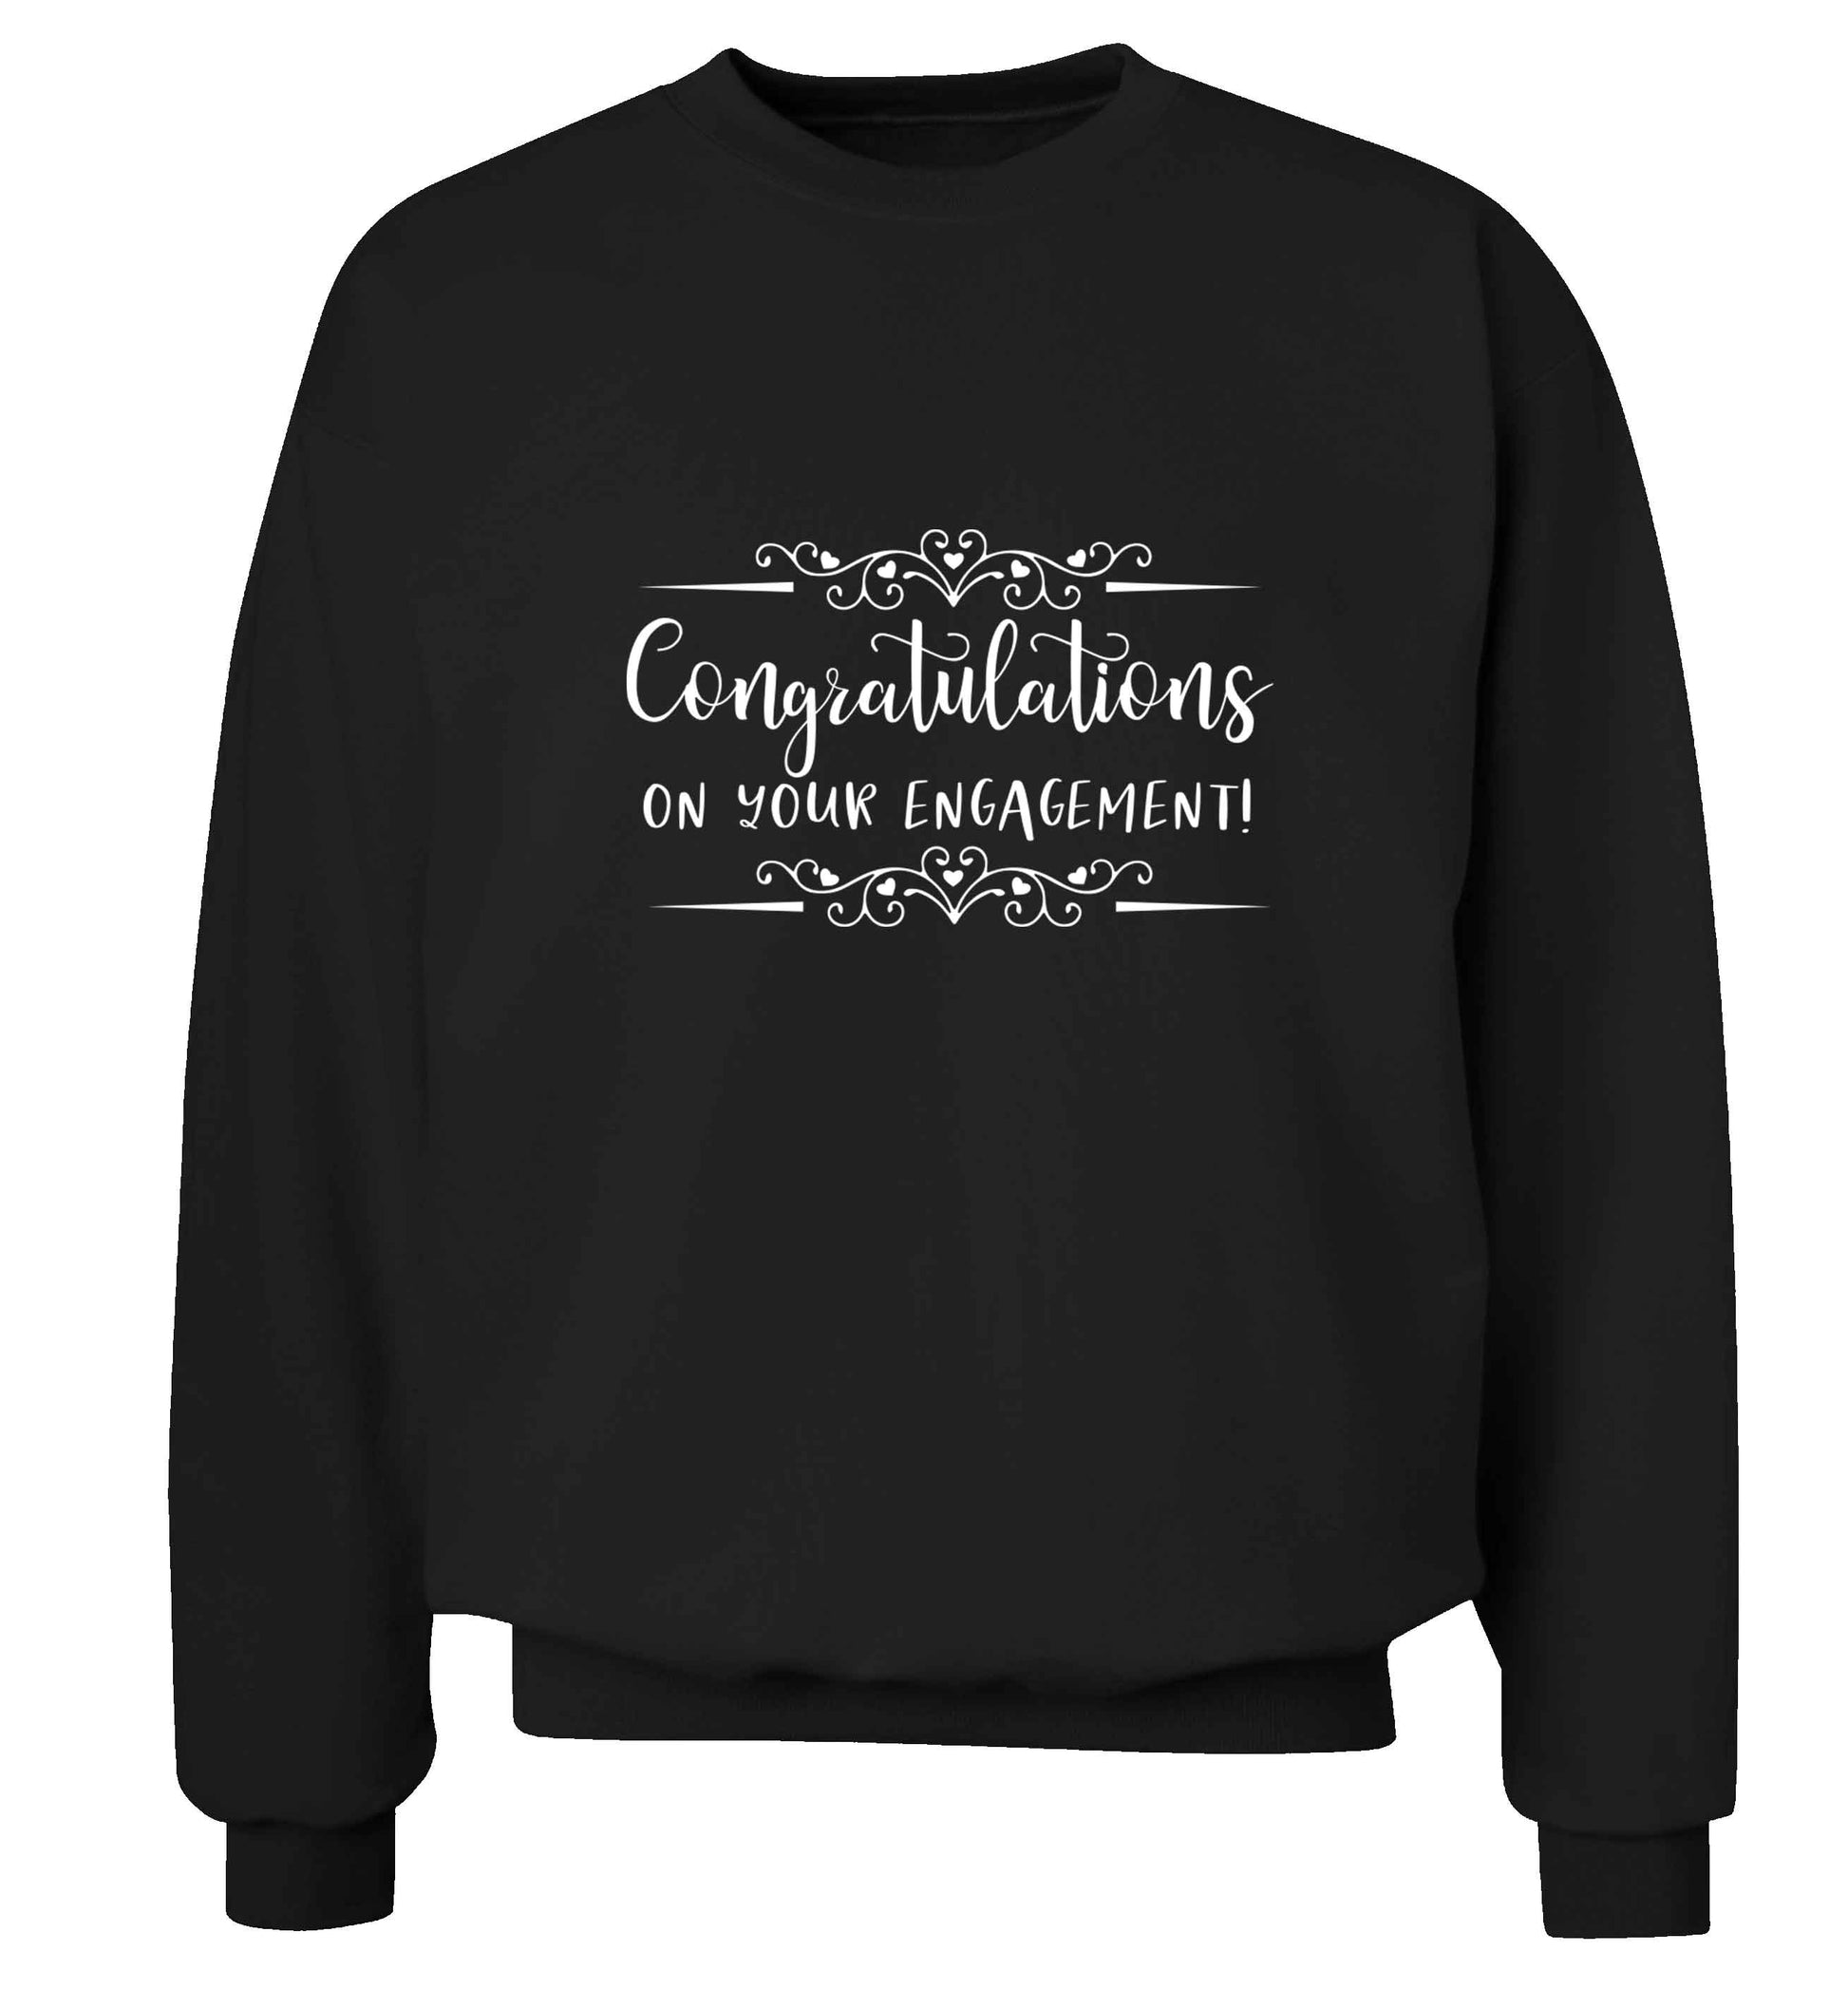 Congratulations on your engagement adult's unisex black sweater 2XL